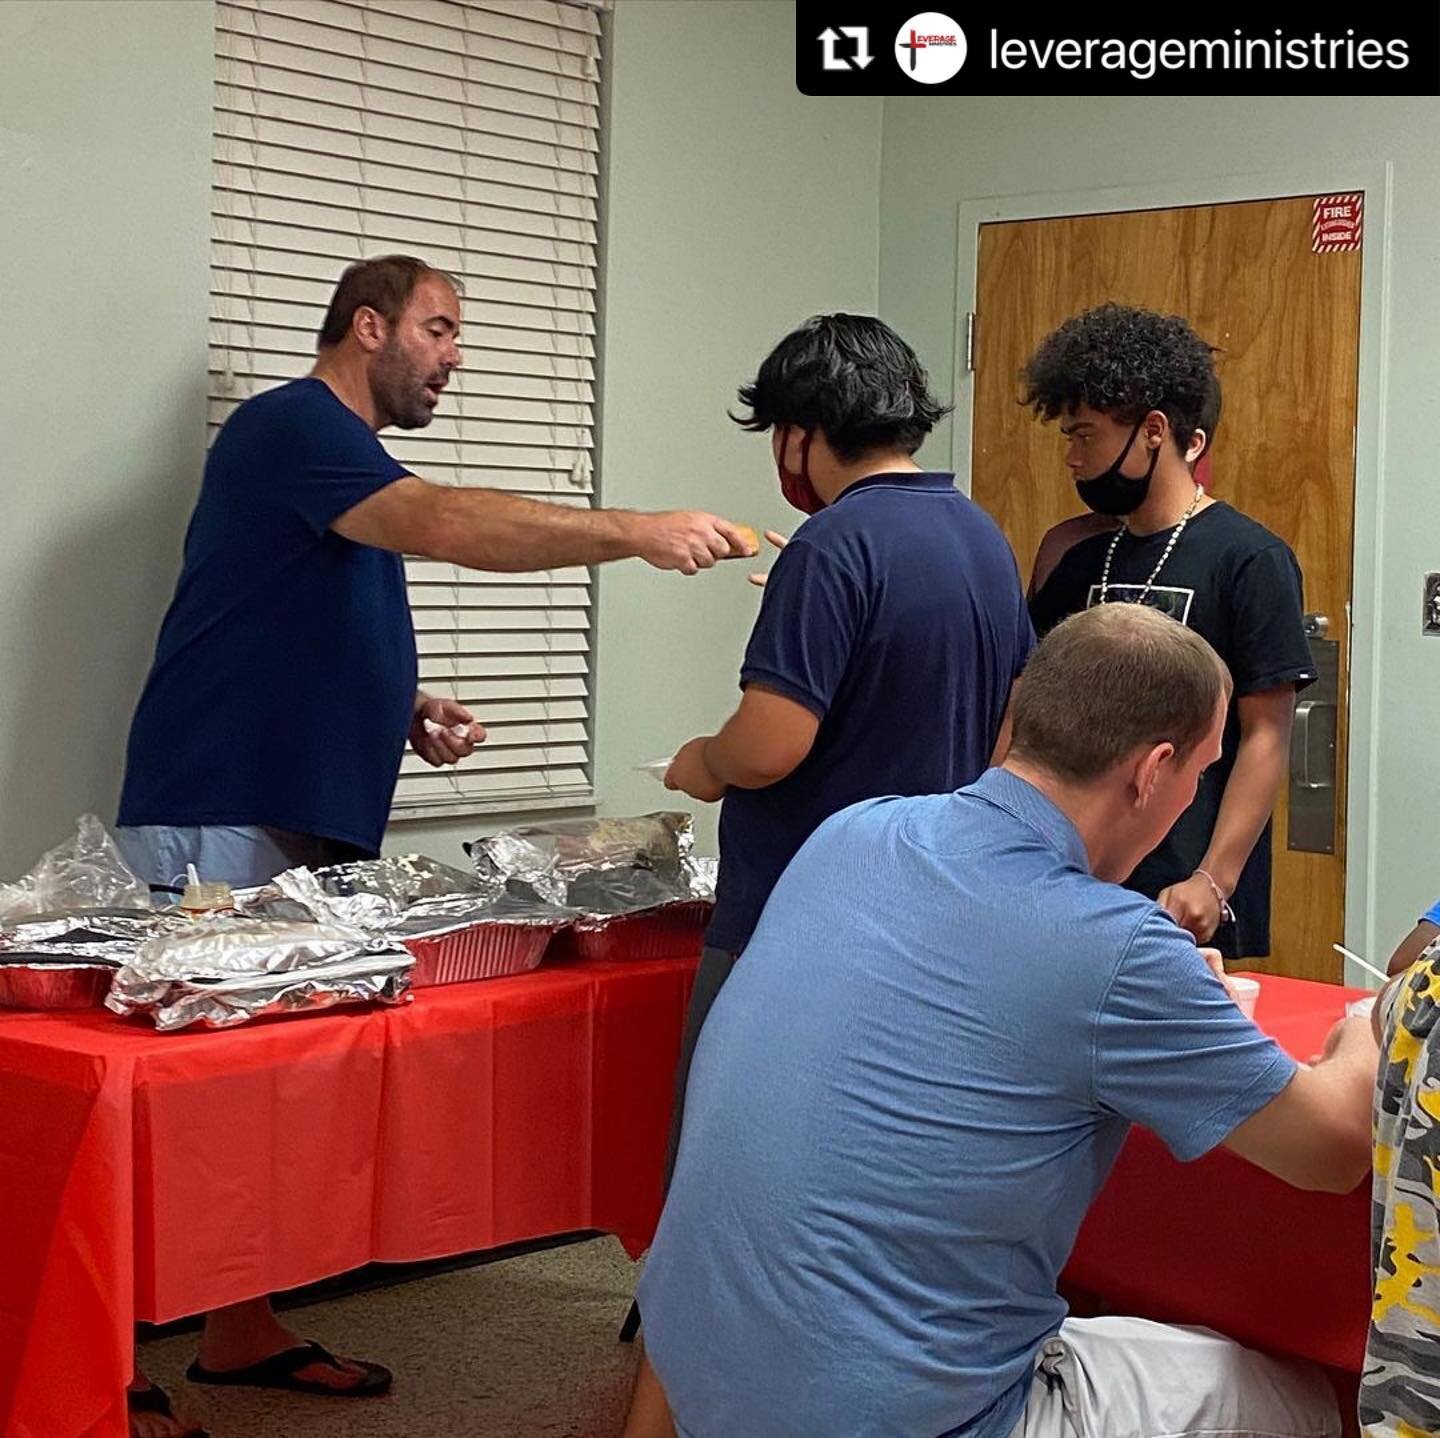 #Repost @leverageministries with @make_repost
・・・
Last Wednesday, Leverage hosted a Christmas party for the kids at the Bartow Runaway Shelter. We played games, enjoyed a special holiday meal prepared by @joebearsbbq and David Hirdes shared the Chris